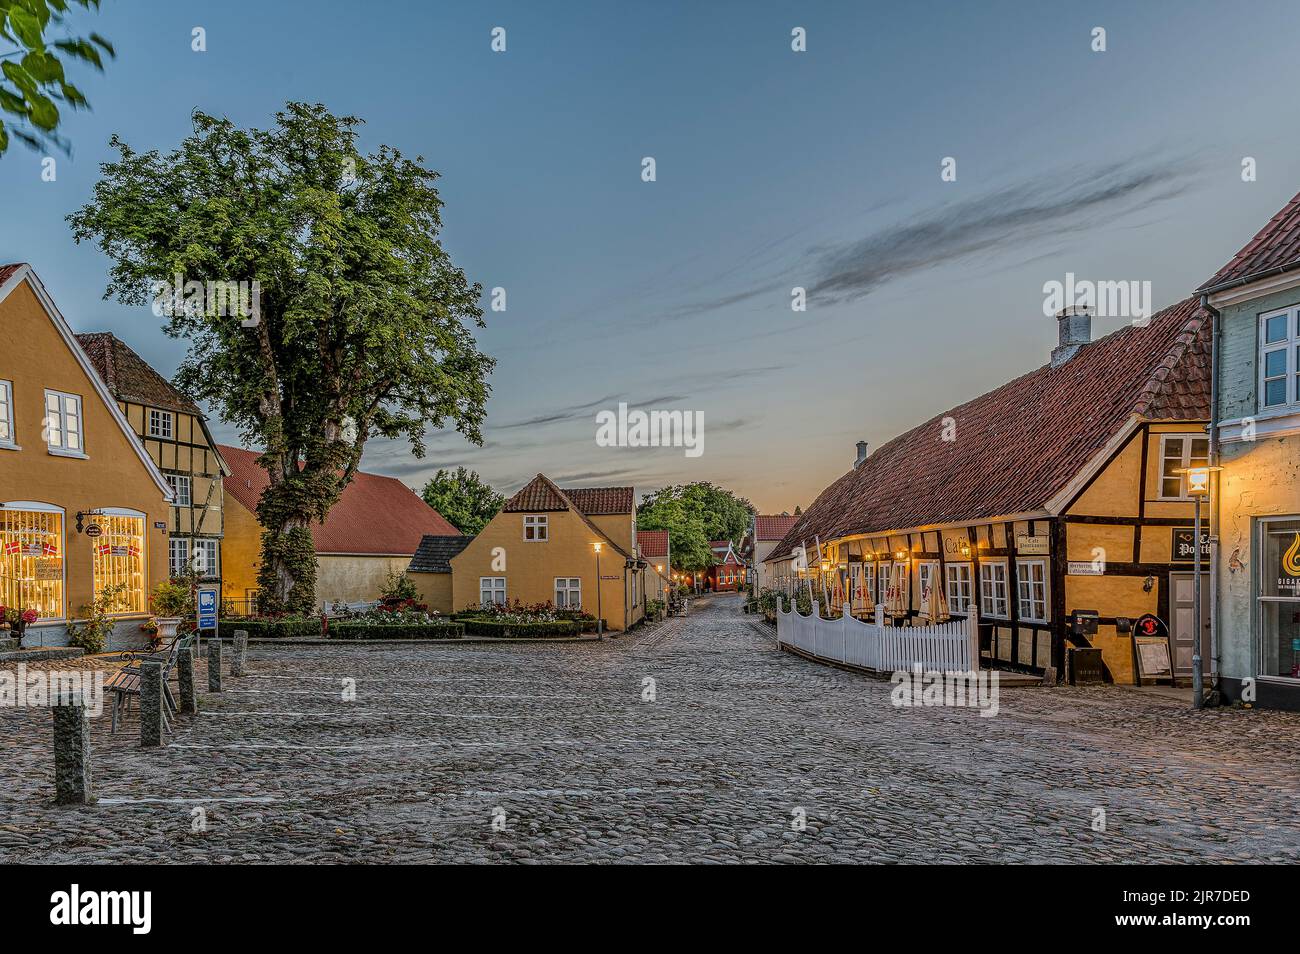 The square in the idyllic town Mariager in the twilight hour with light from the streetlamps, Denmark, August 5, 2022 Stock Photo